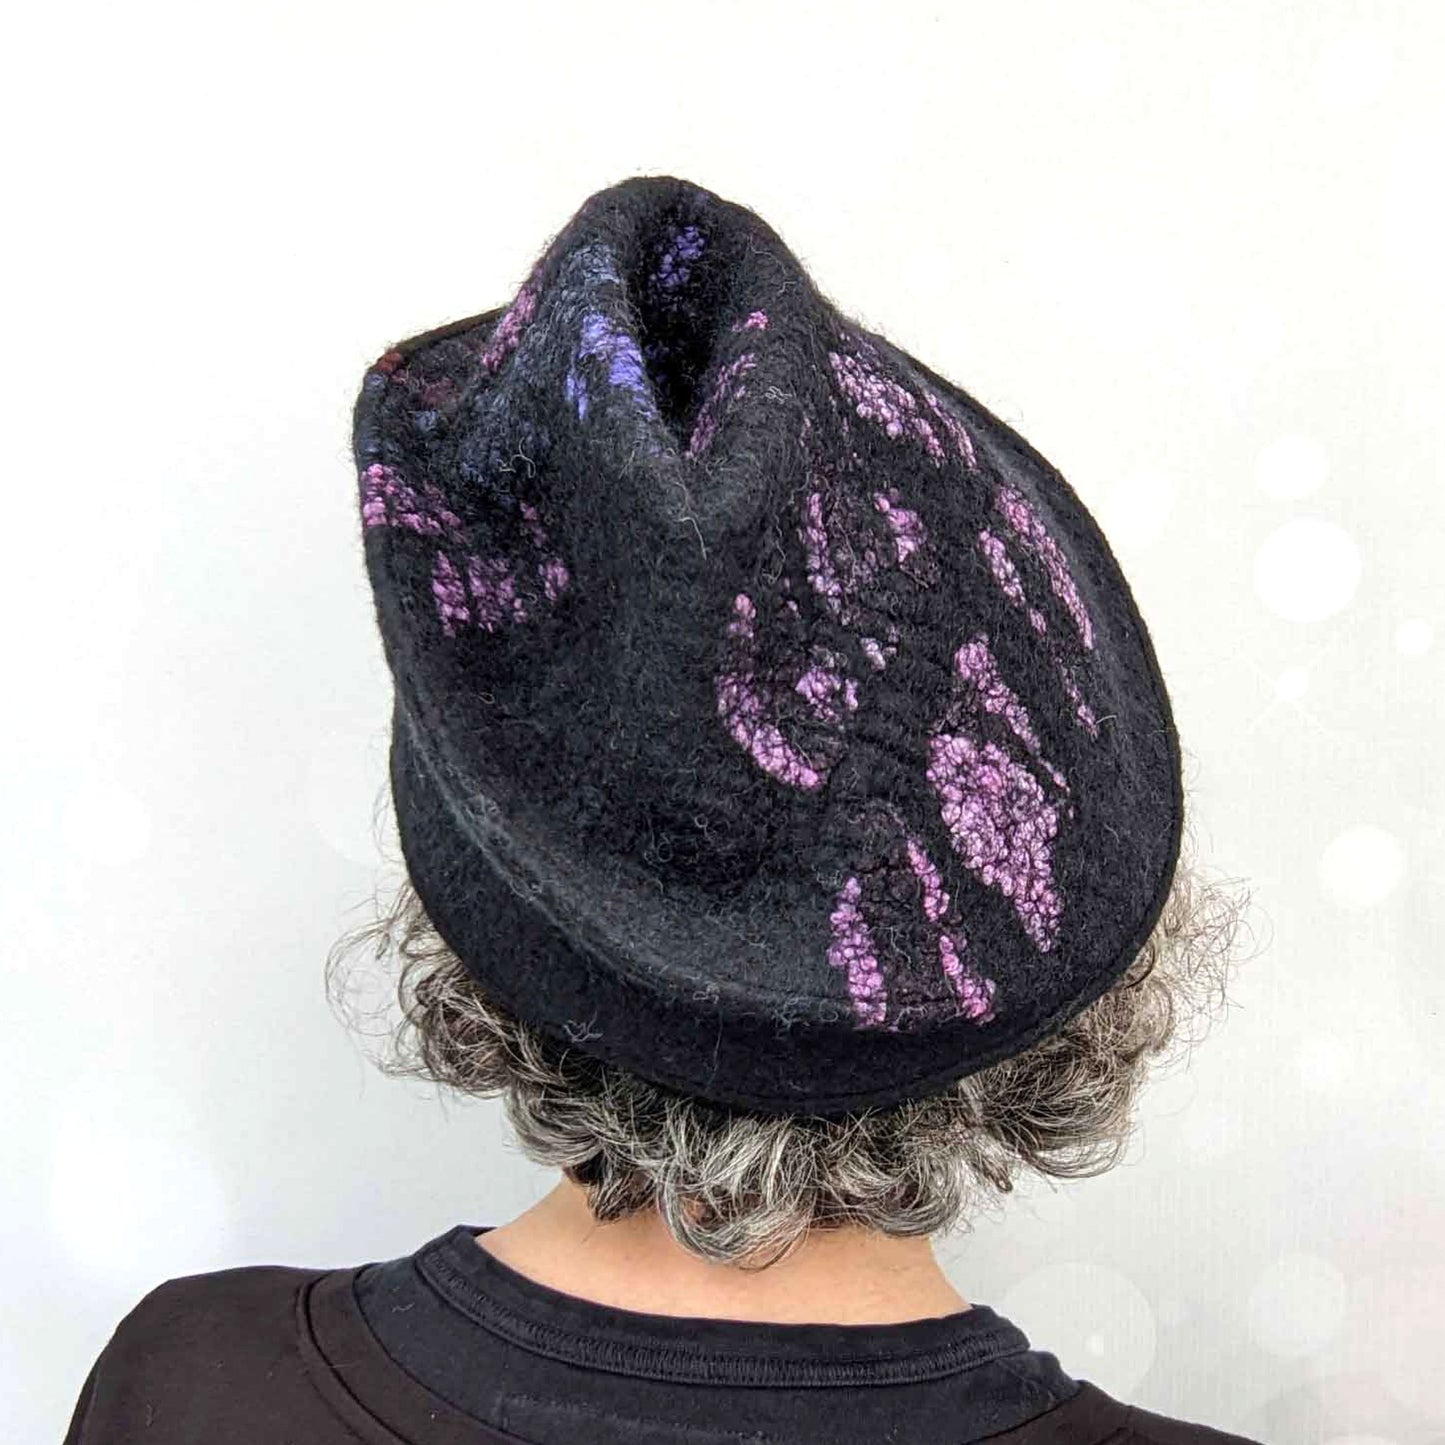 Felted Wool Toque in Black with Vibrant Stained Glass Colors - backview